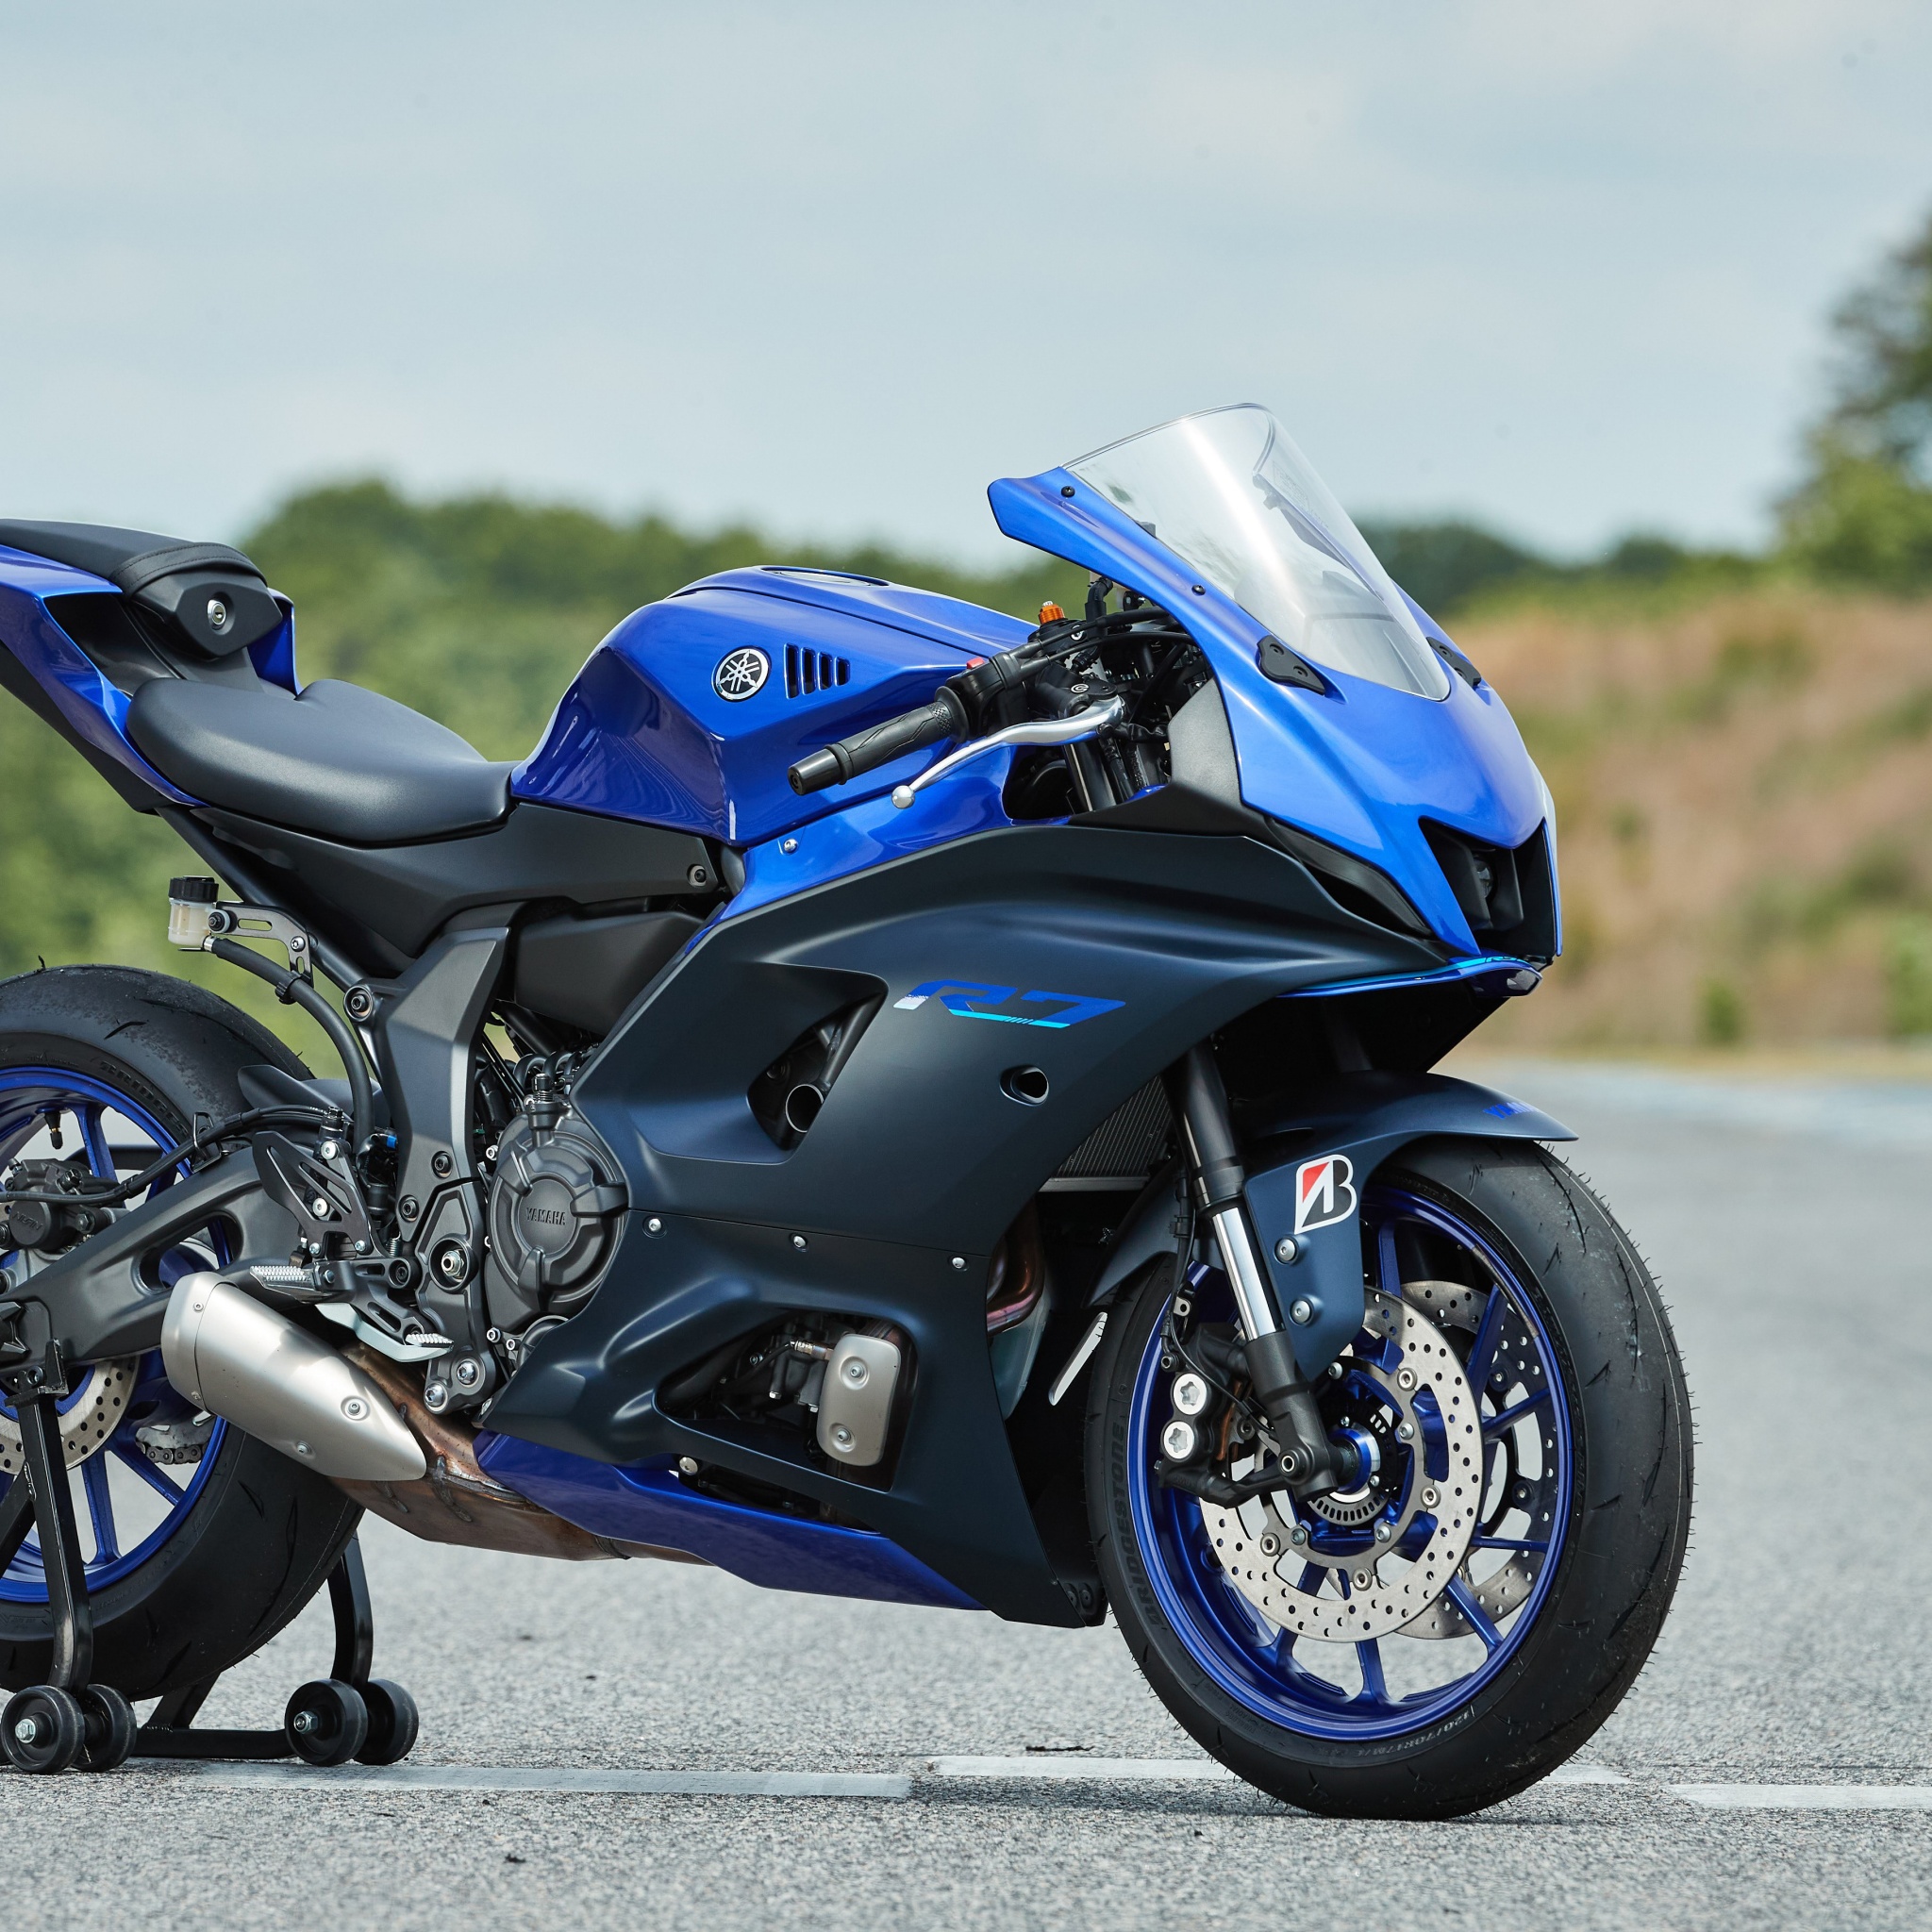 New Yamaha YZF-R7 Motorcycle Wallpapers